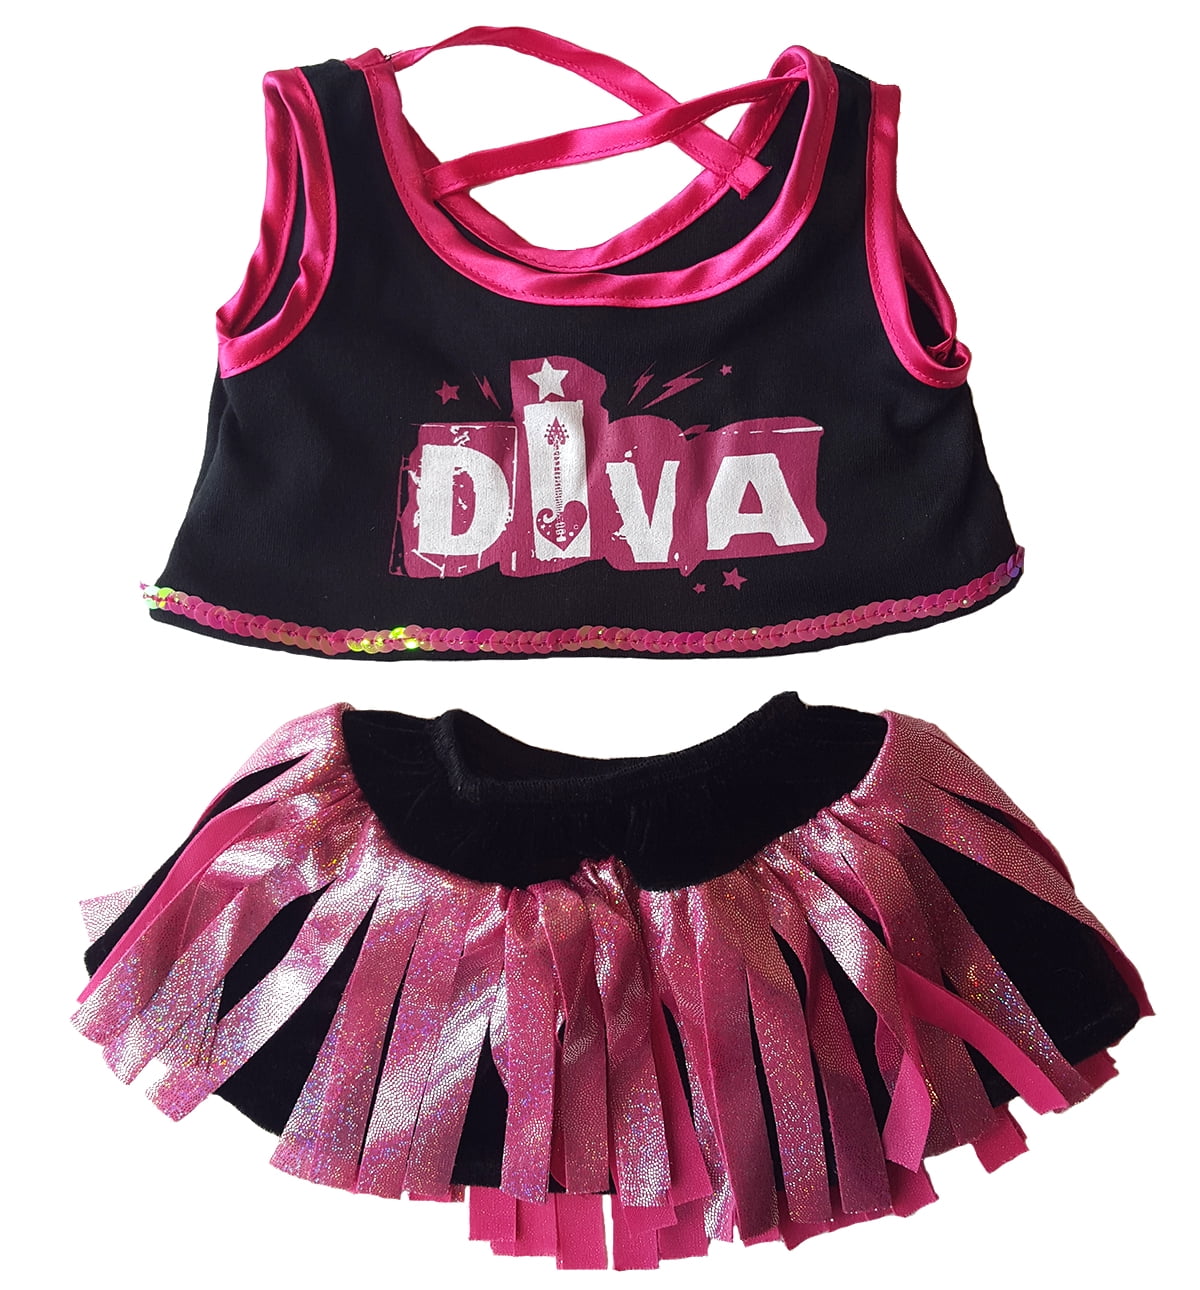 18" Build-a-bear and Make Your Own Stuffed An Details about   Pink Cheer Warm Up Fits Most 14" 